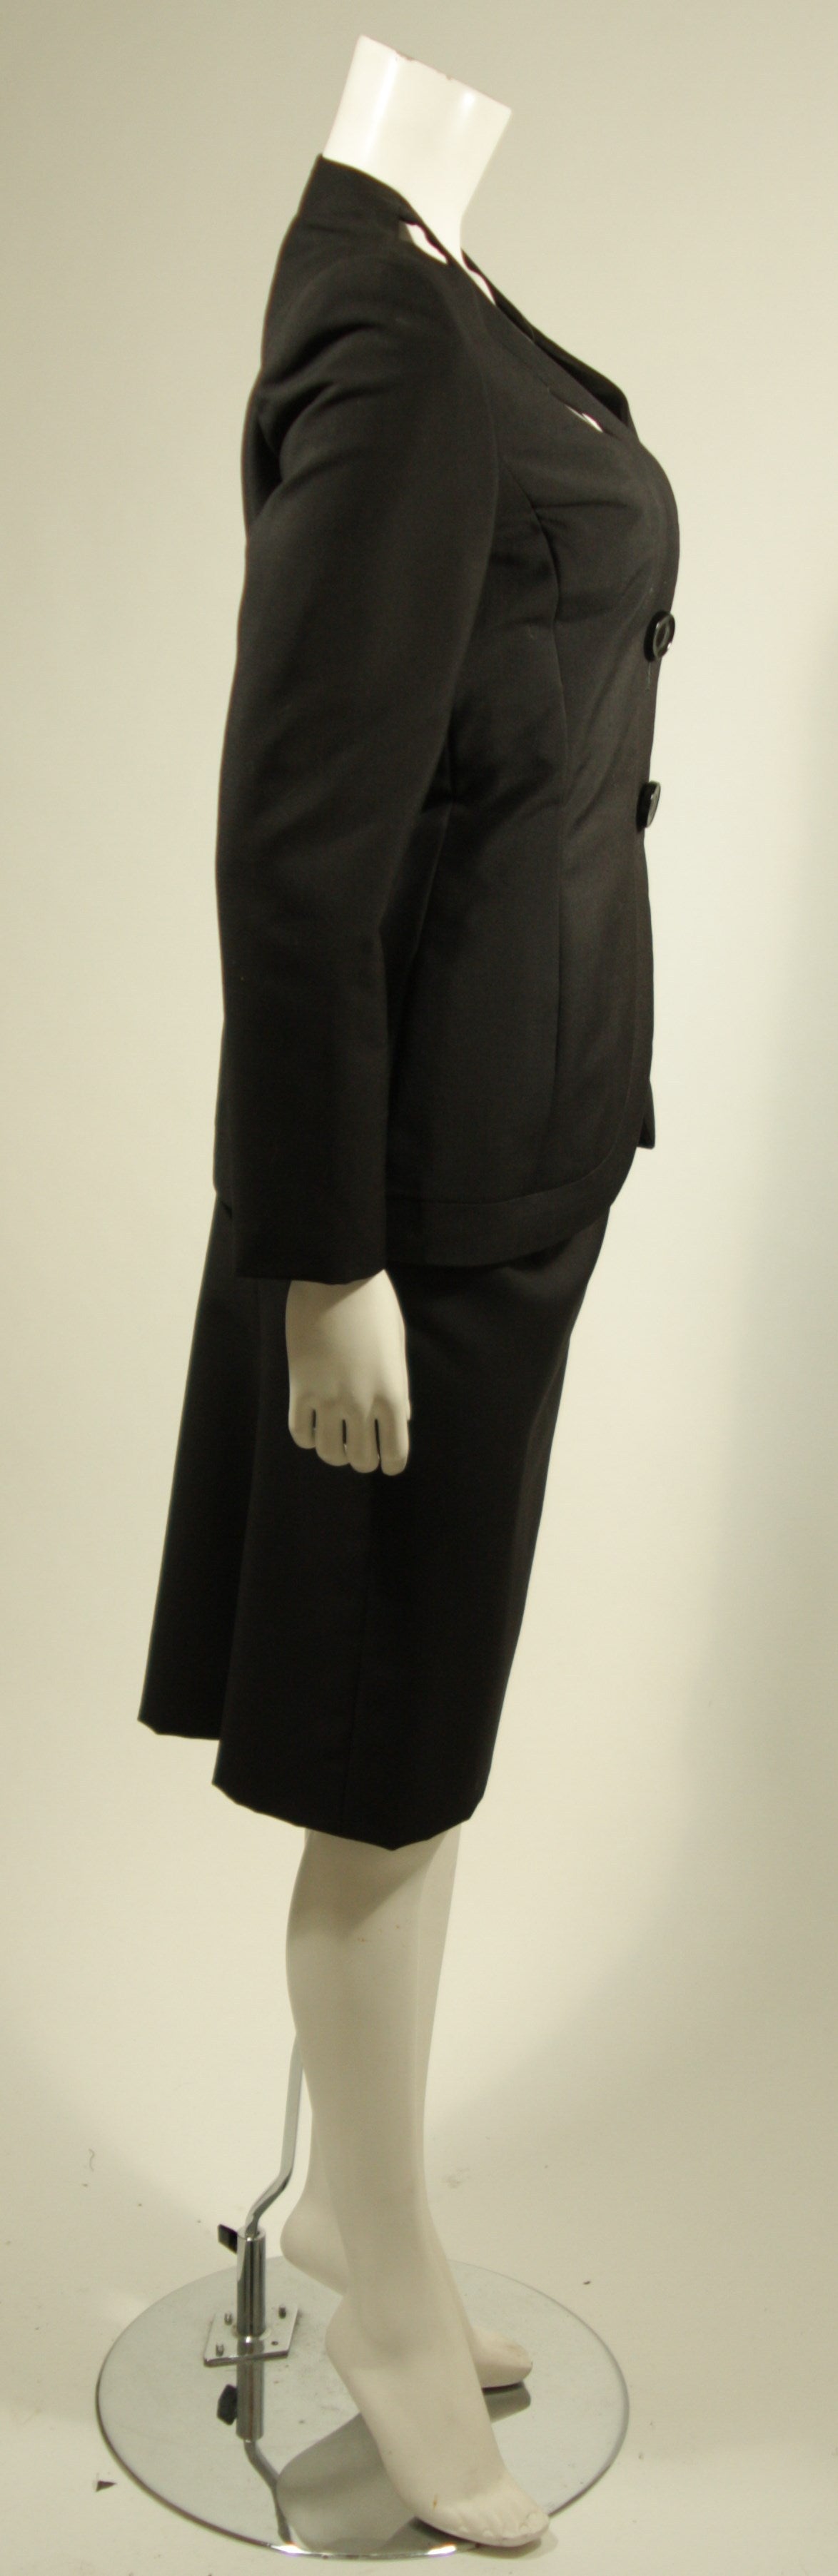 Women's GALANOS HAUTE COUTURE Betsy Bloomingdale Black Skirt Suit with Cut-Out Details